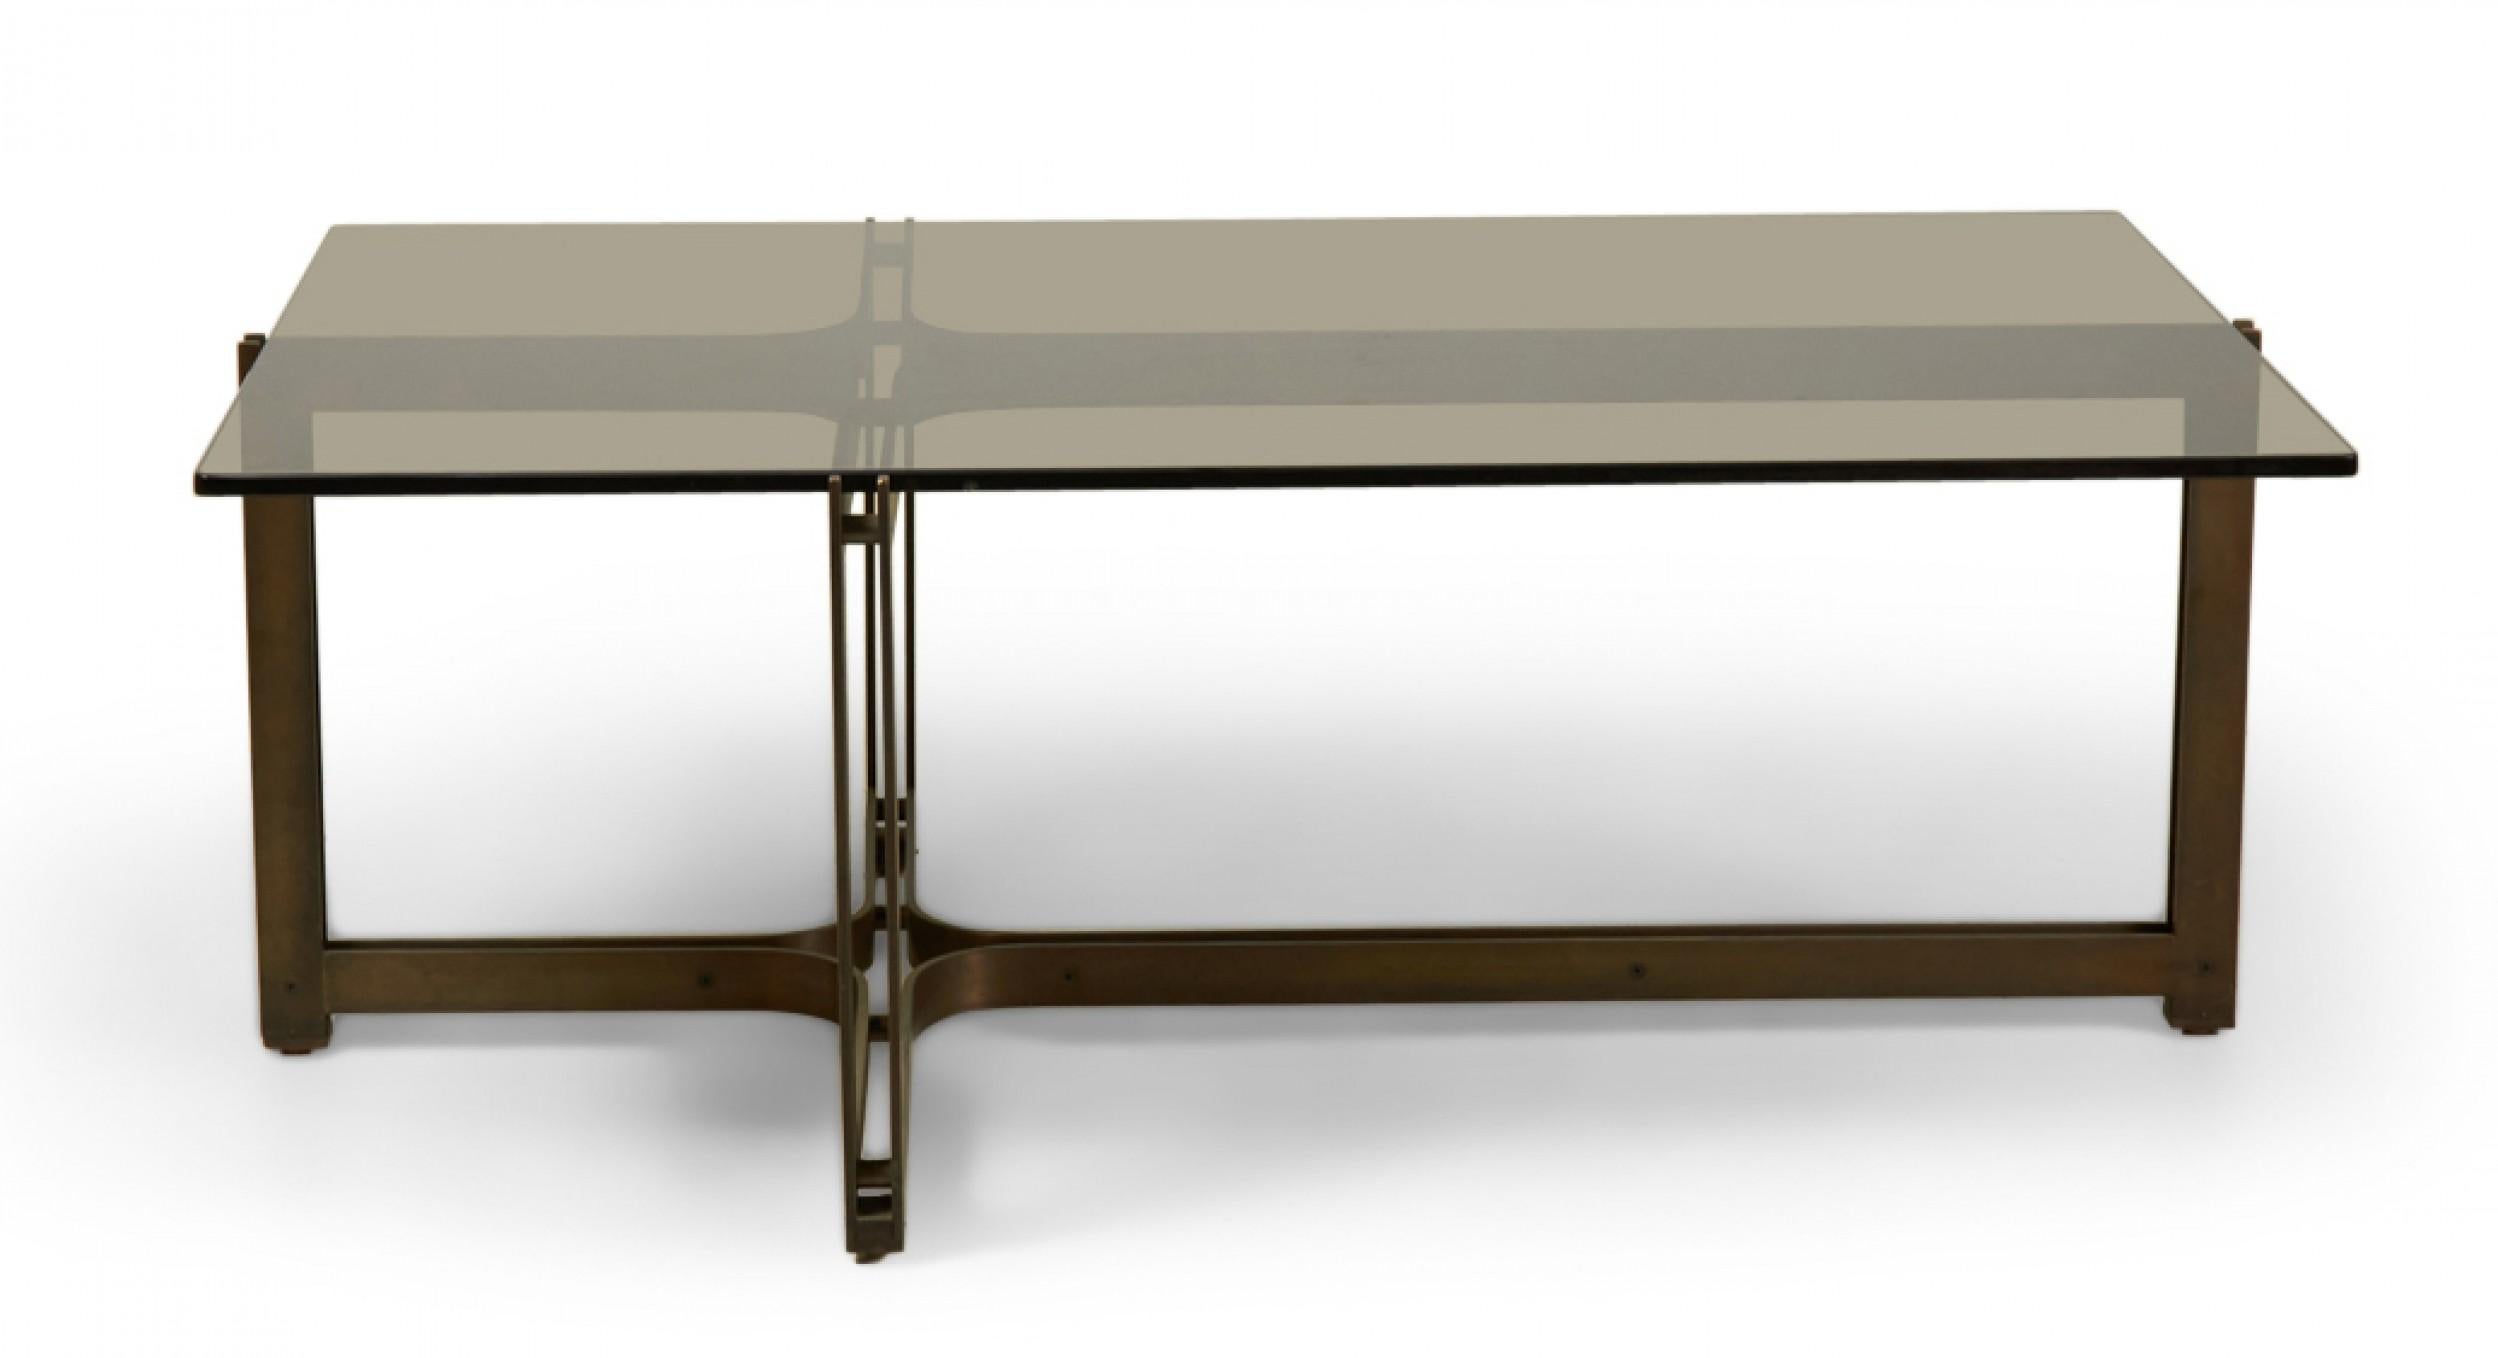 American Mid-Century (1960s) rectangular cocktail / coffee table with an inset smoked glass top supported by a bronze cross-shaped frame with a stretcher base, resting on rosewood feet. (ROGER SPRUNGER FOR DUNBAR)